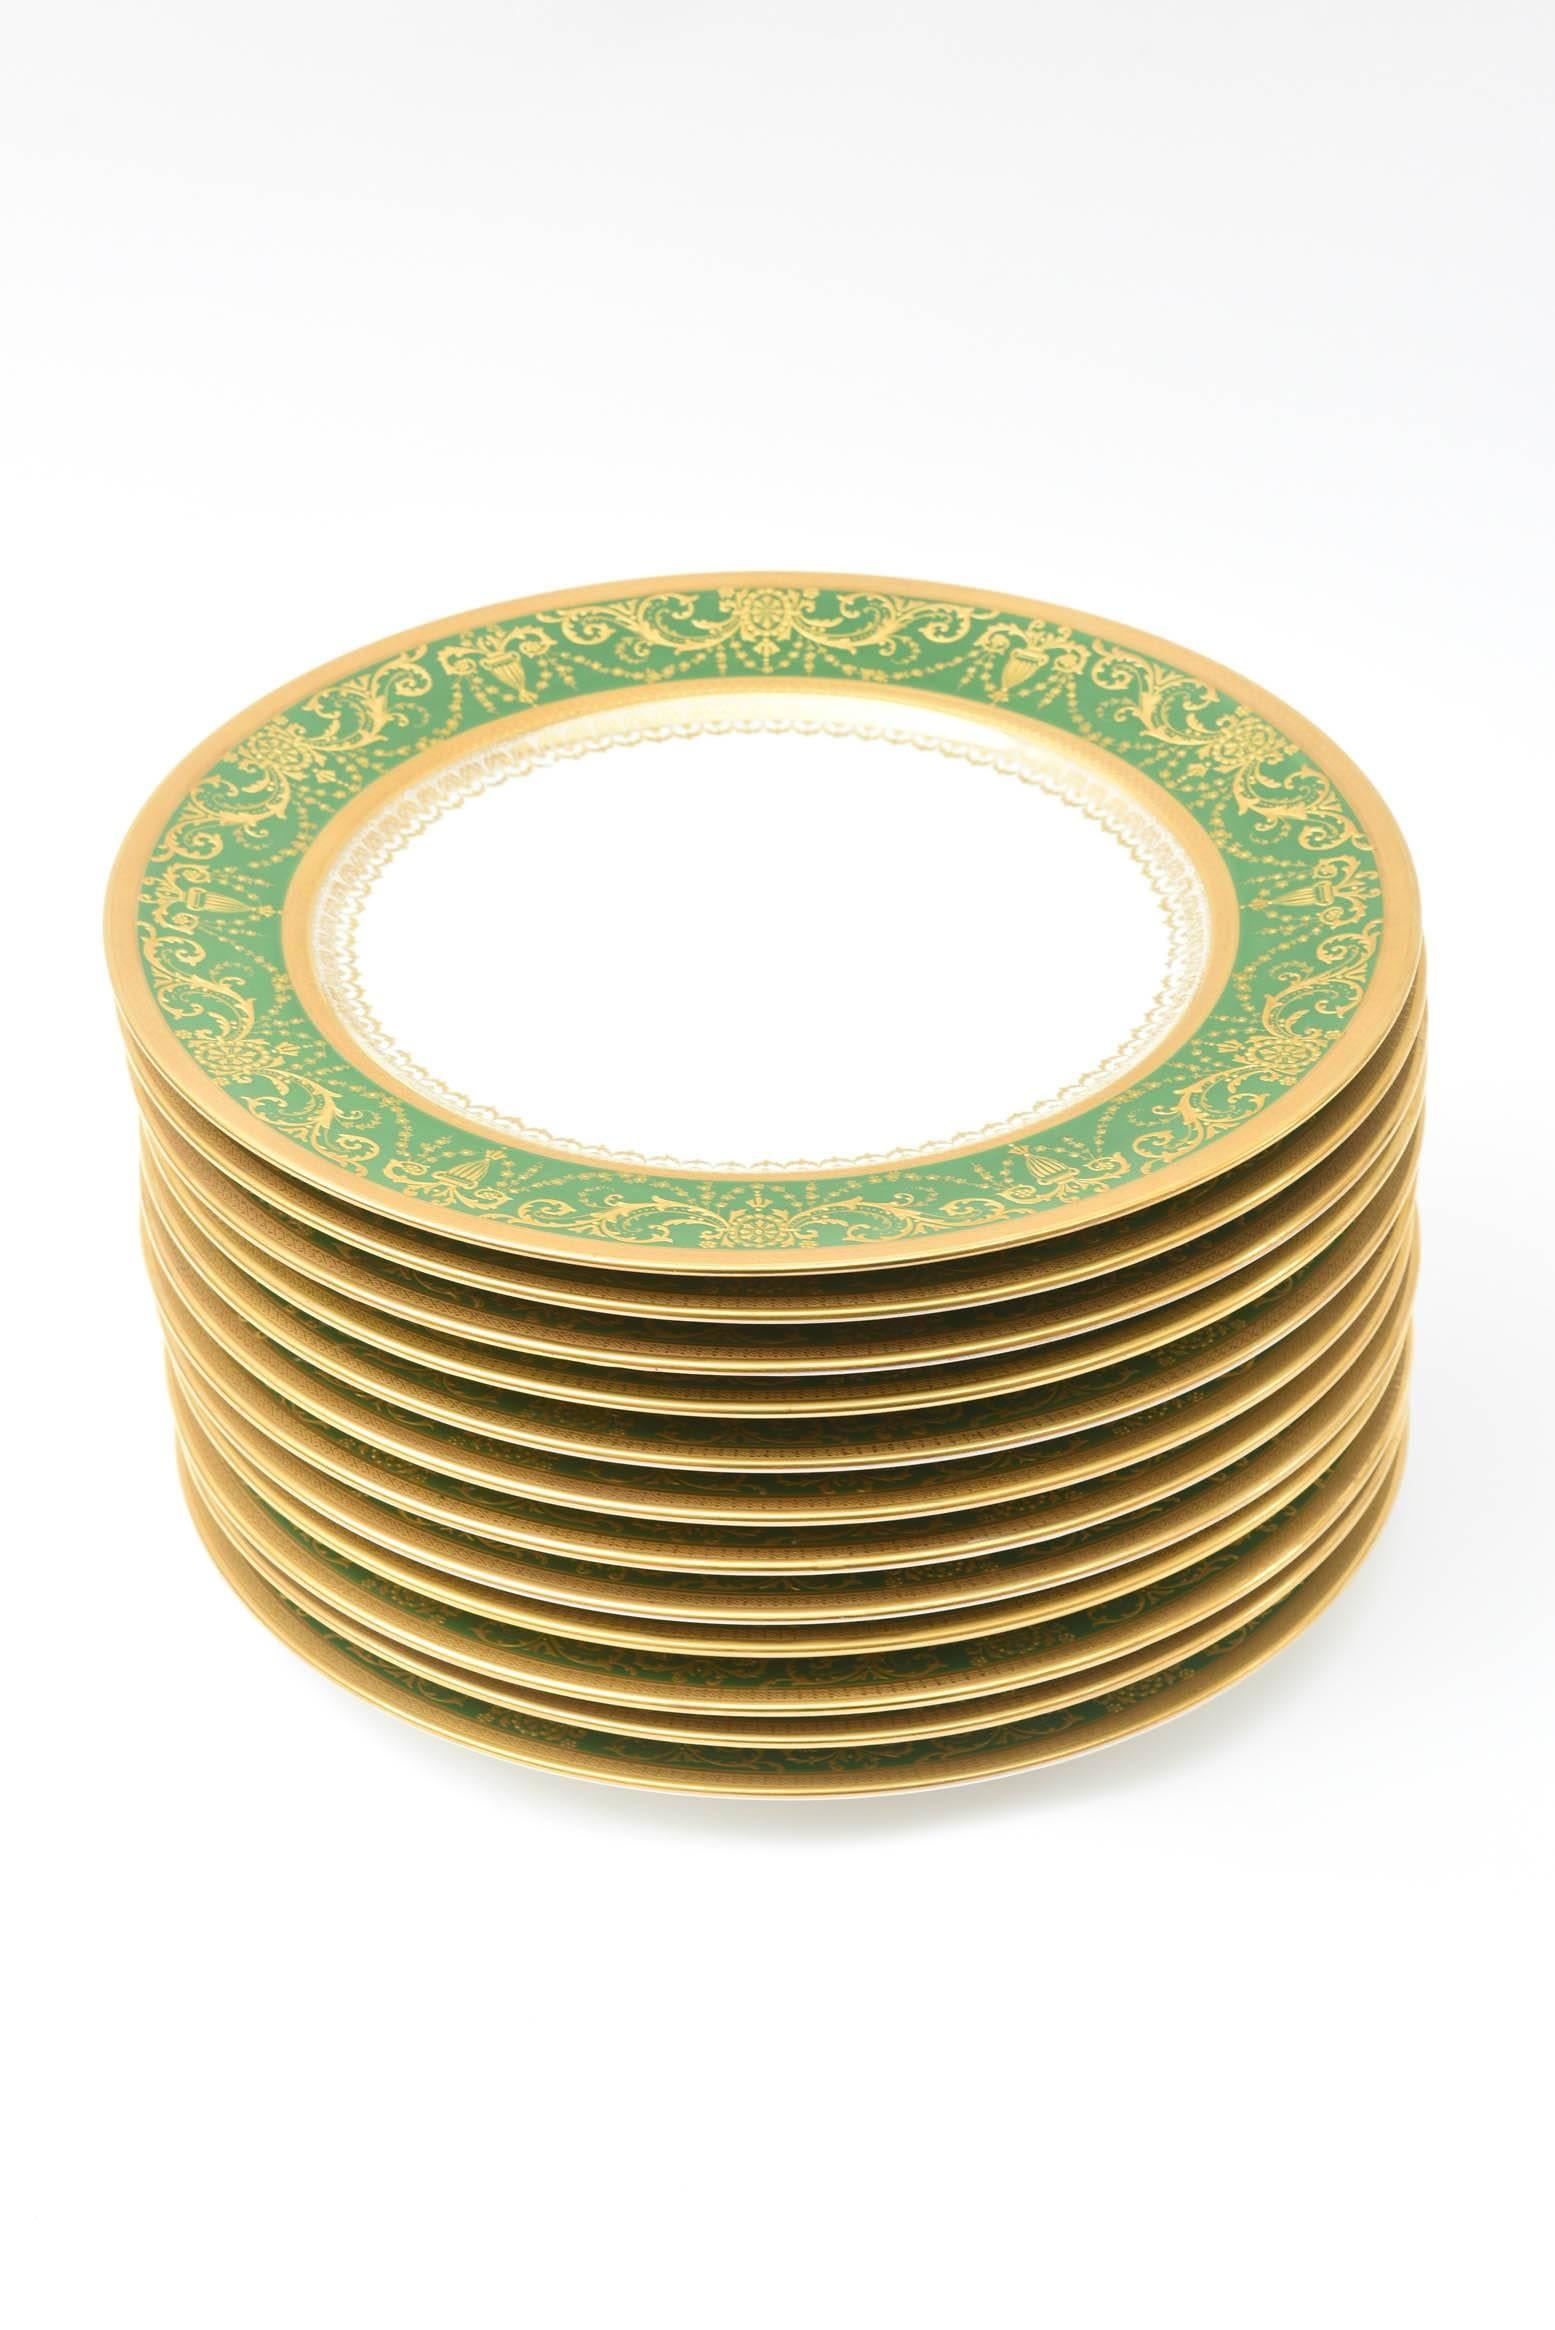 Hand-Crafted 12 Antique French Rich Green and Heavily Gilded Dinner Plates, Oversized